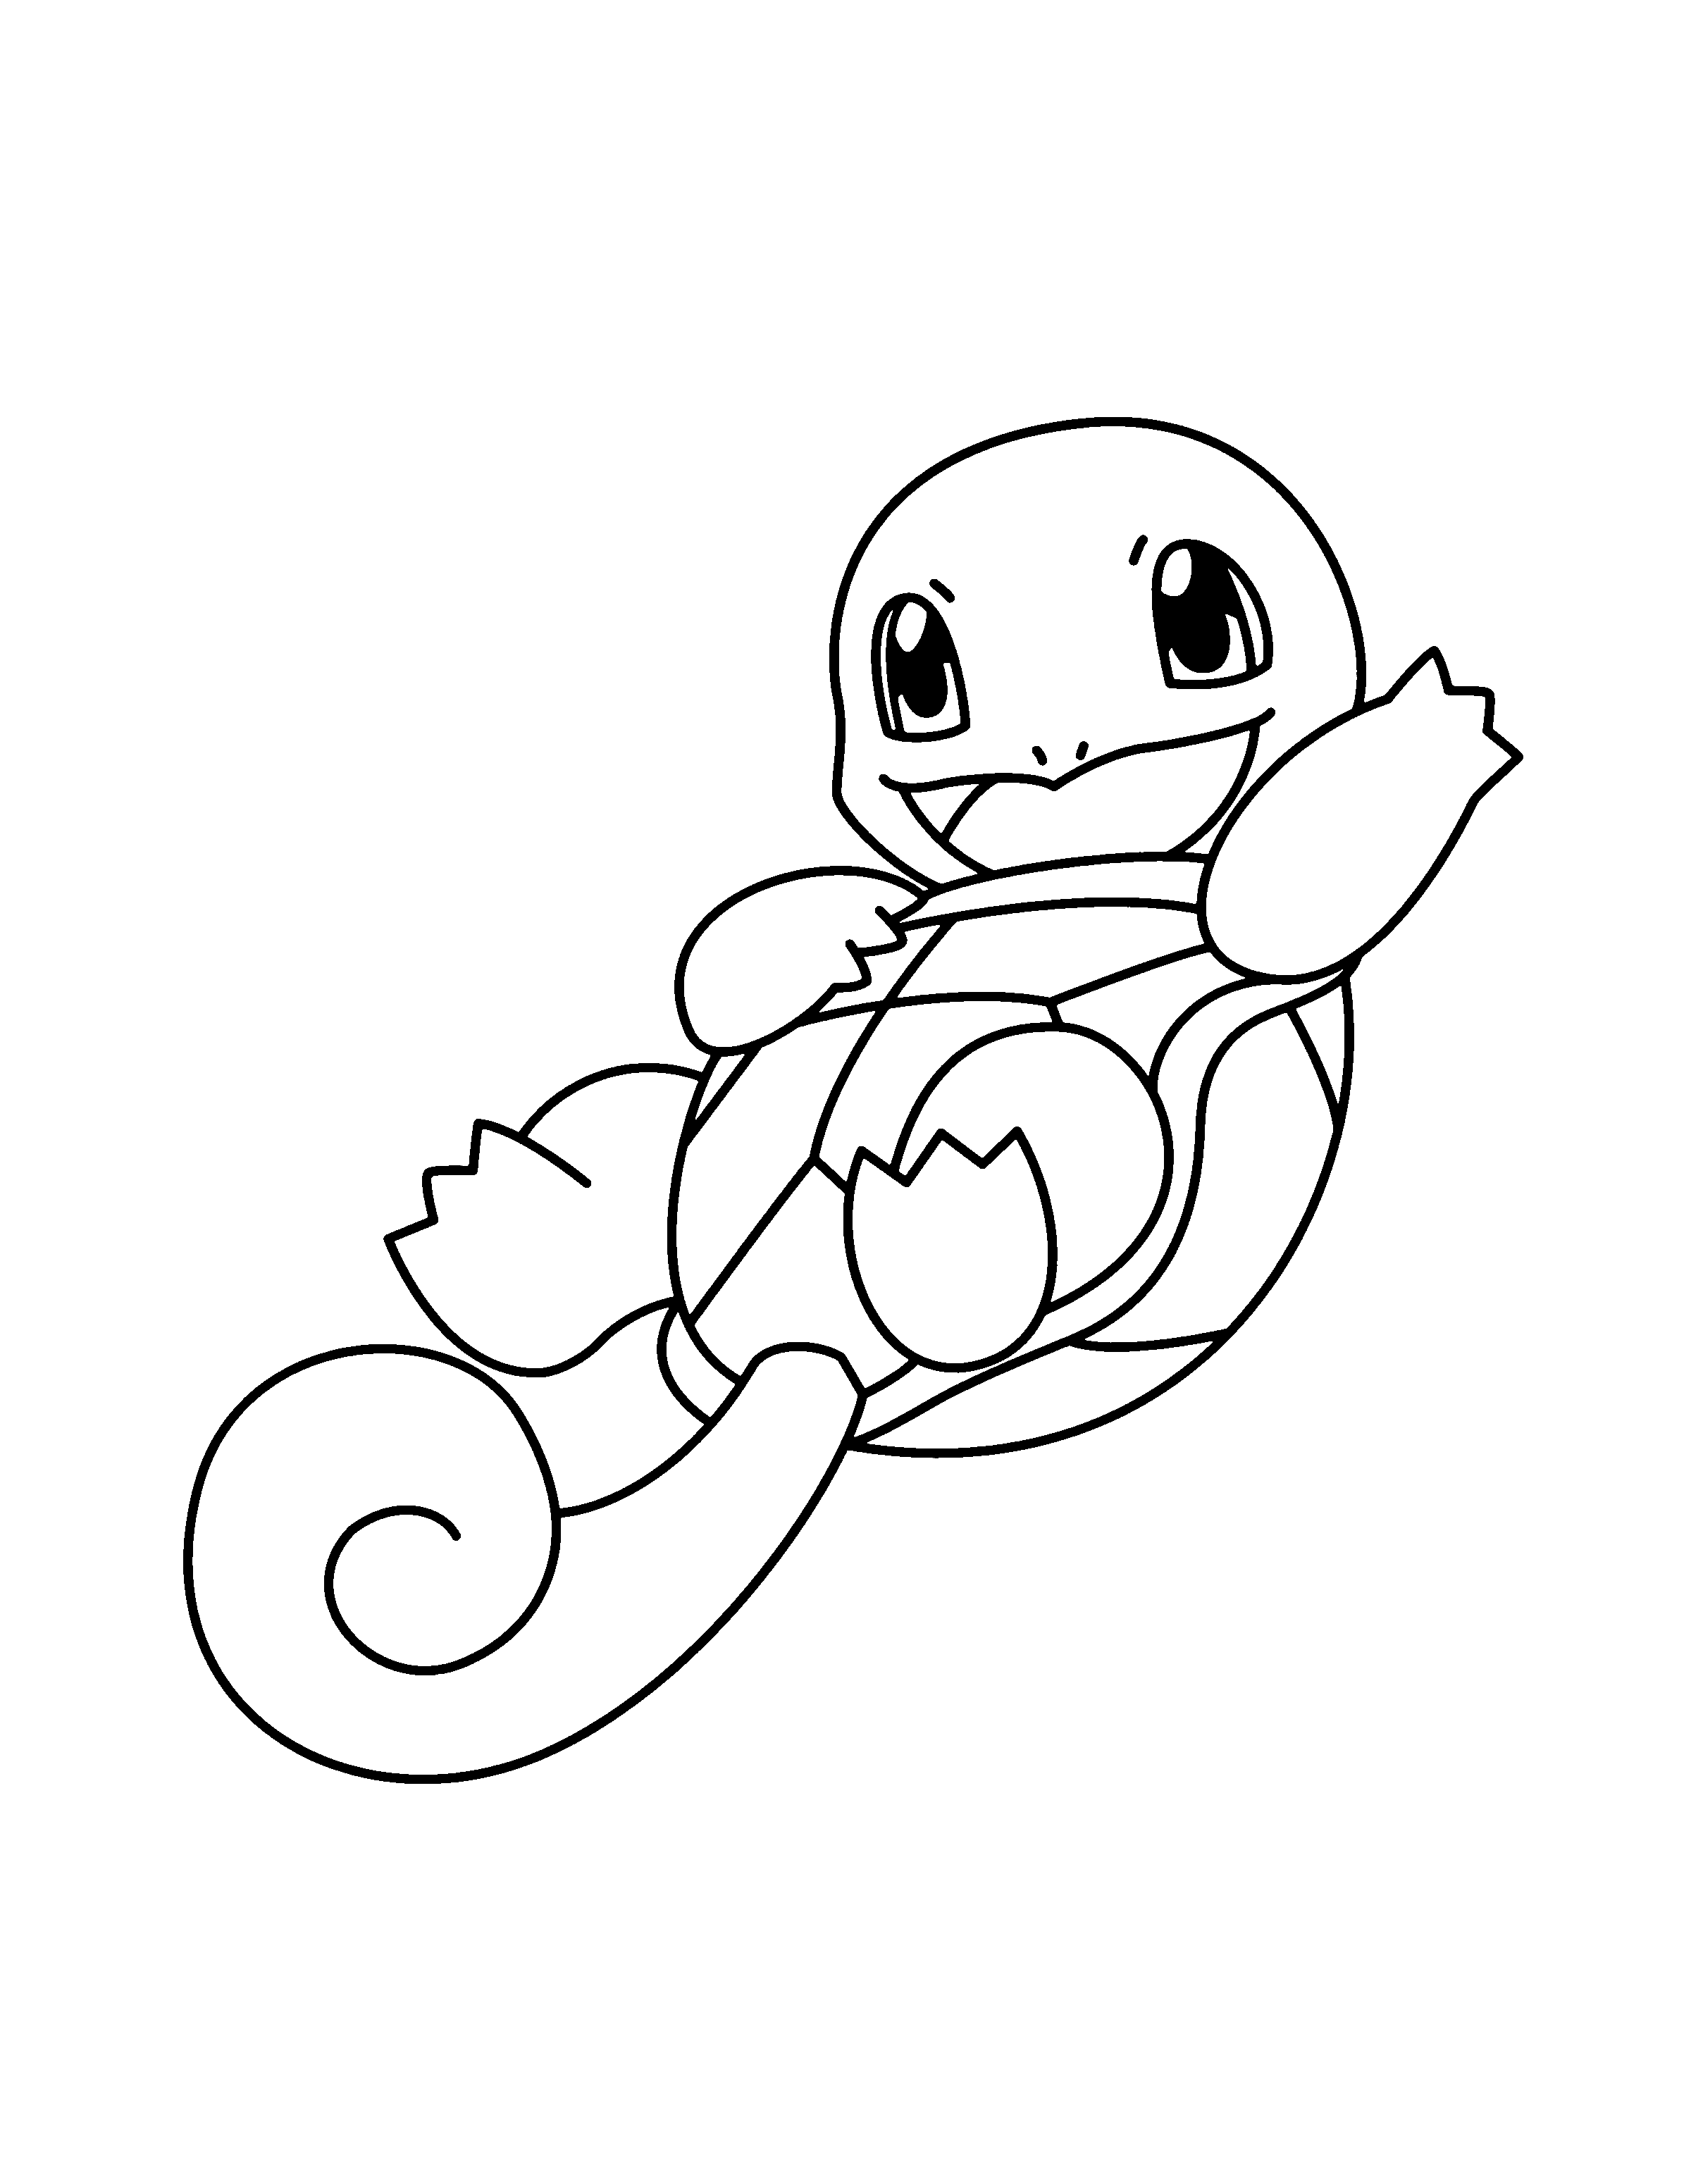 Coloring Page Pokemon Advanced Coloring Pages 72 Pokemon Coloring Pages Pokemon Color